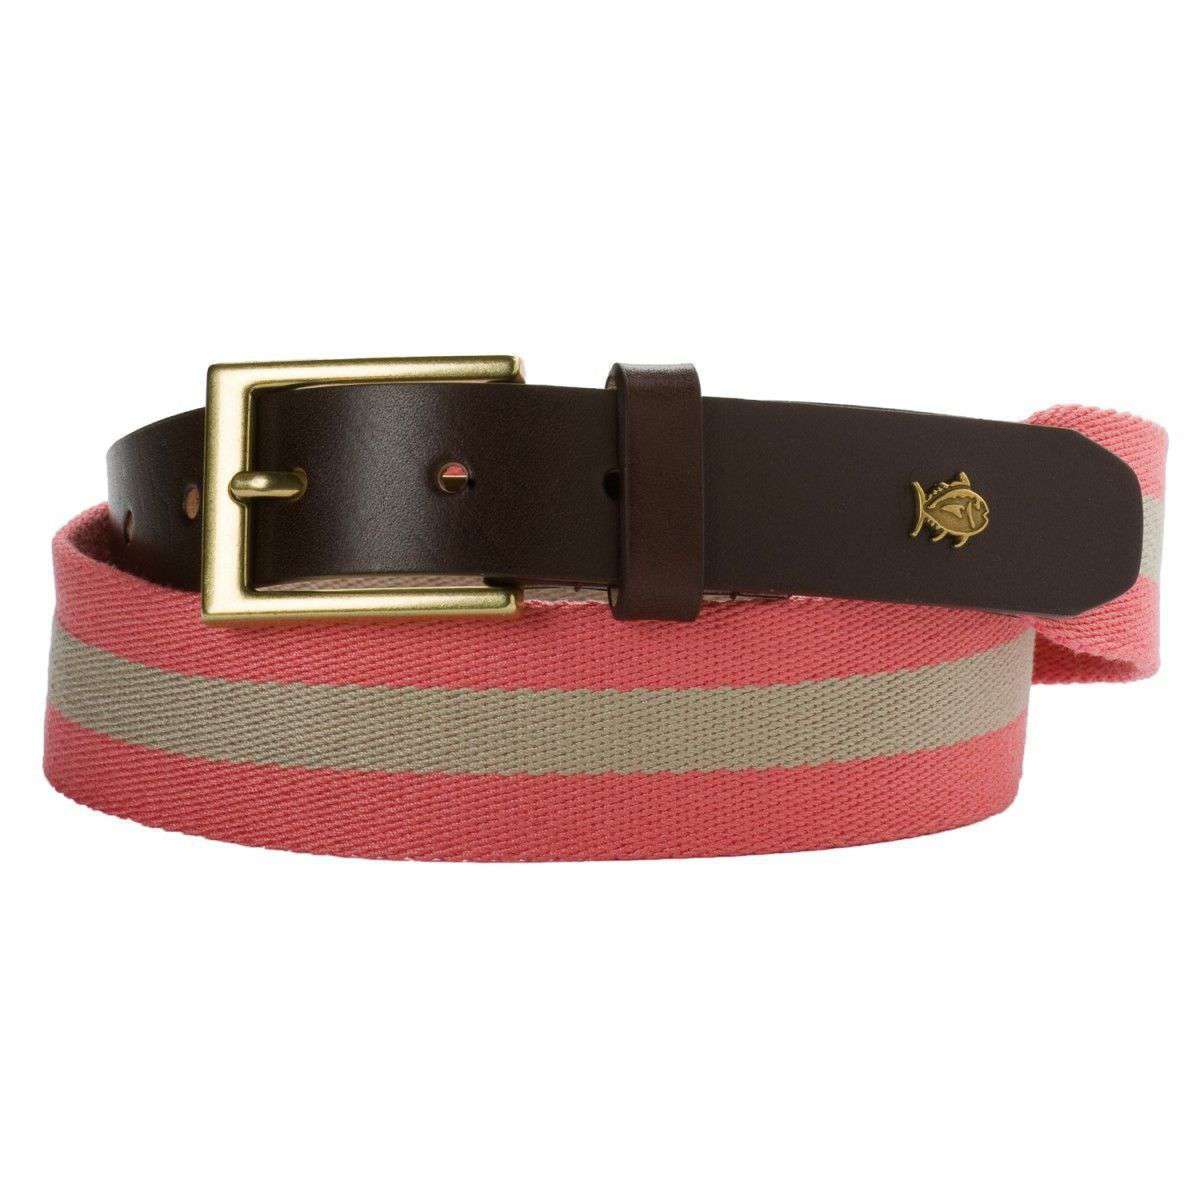 Classic Surcingle Belt in Salmon & Khaki by Southern Tide - Country Club Prep